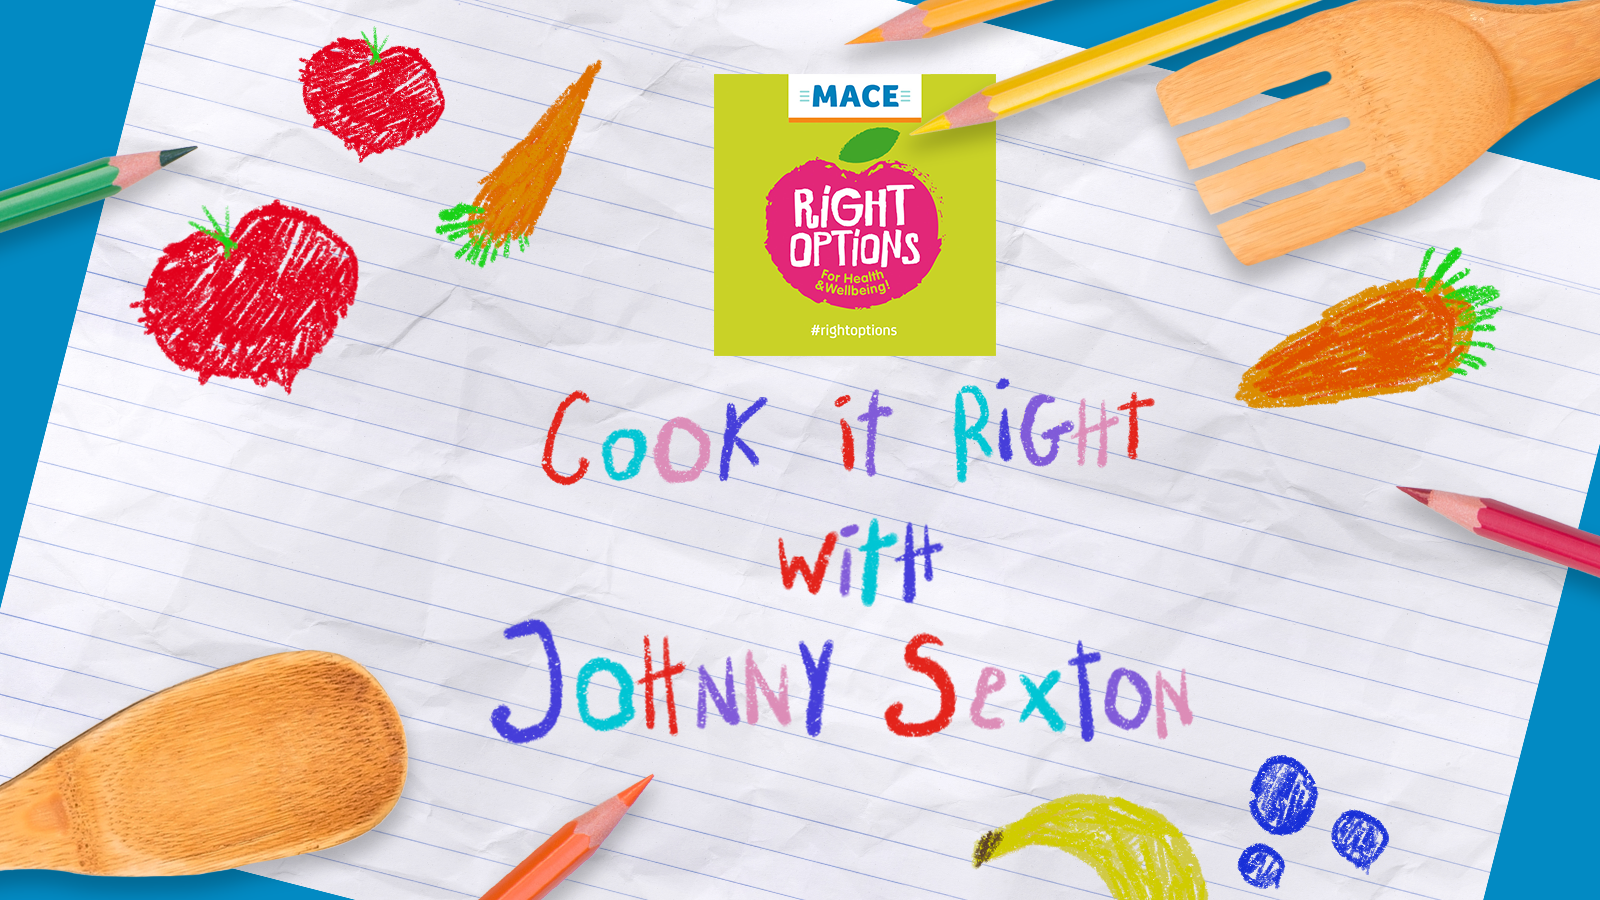 Cook it Right with Johnny Sexton!